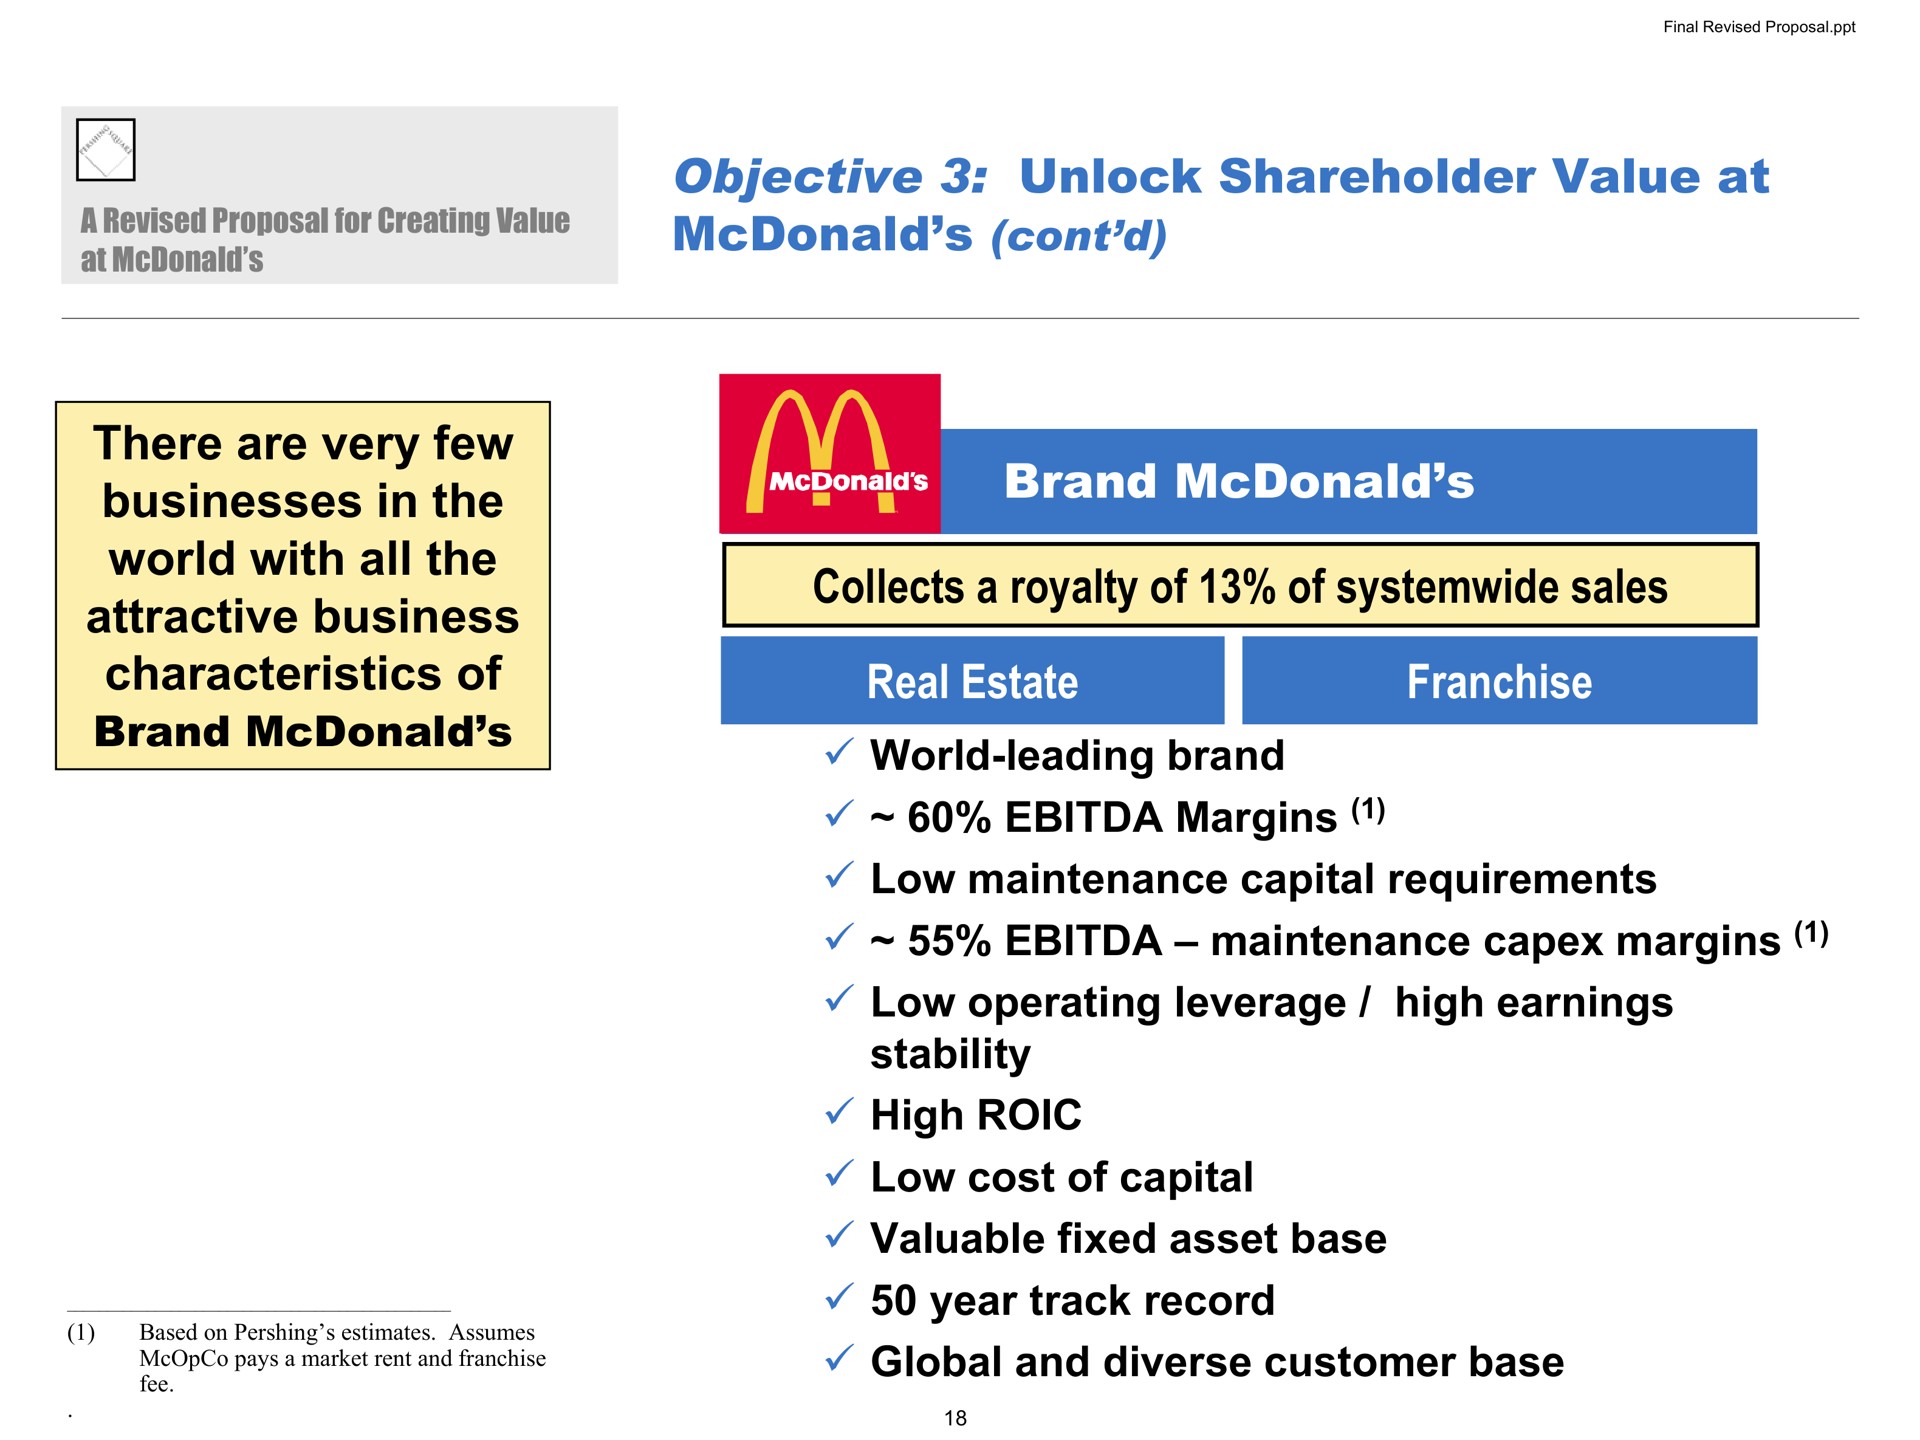 objective unlock shareholder value at there are very few businesses in the world with all the attractive business characteristics of brand brand collects a royalty of of sales real estate franchise world leading brand margins low maintenance capital requirements maintenance margins low operating leverage high earnings stability high low cost of capital valuable fixed asset base year track record global and diverse customer base aes ere me | Pershing Square